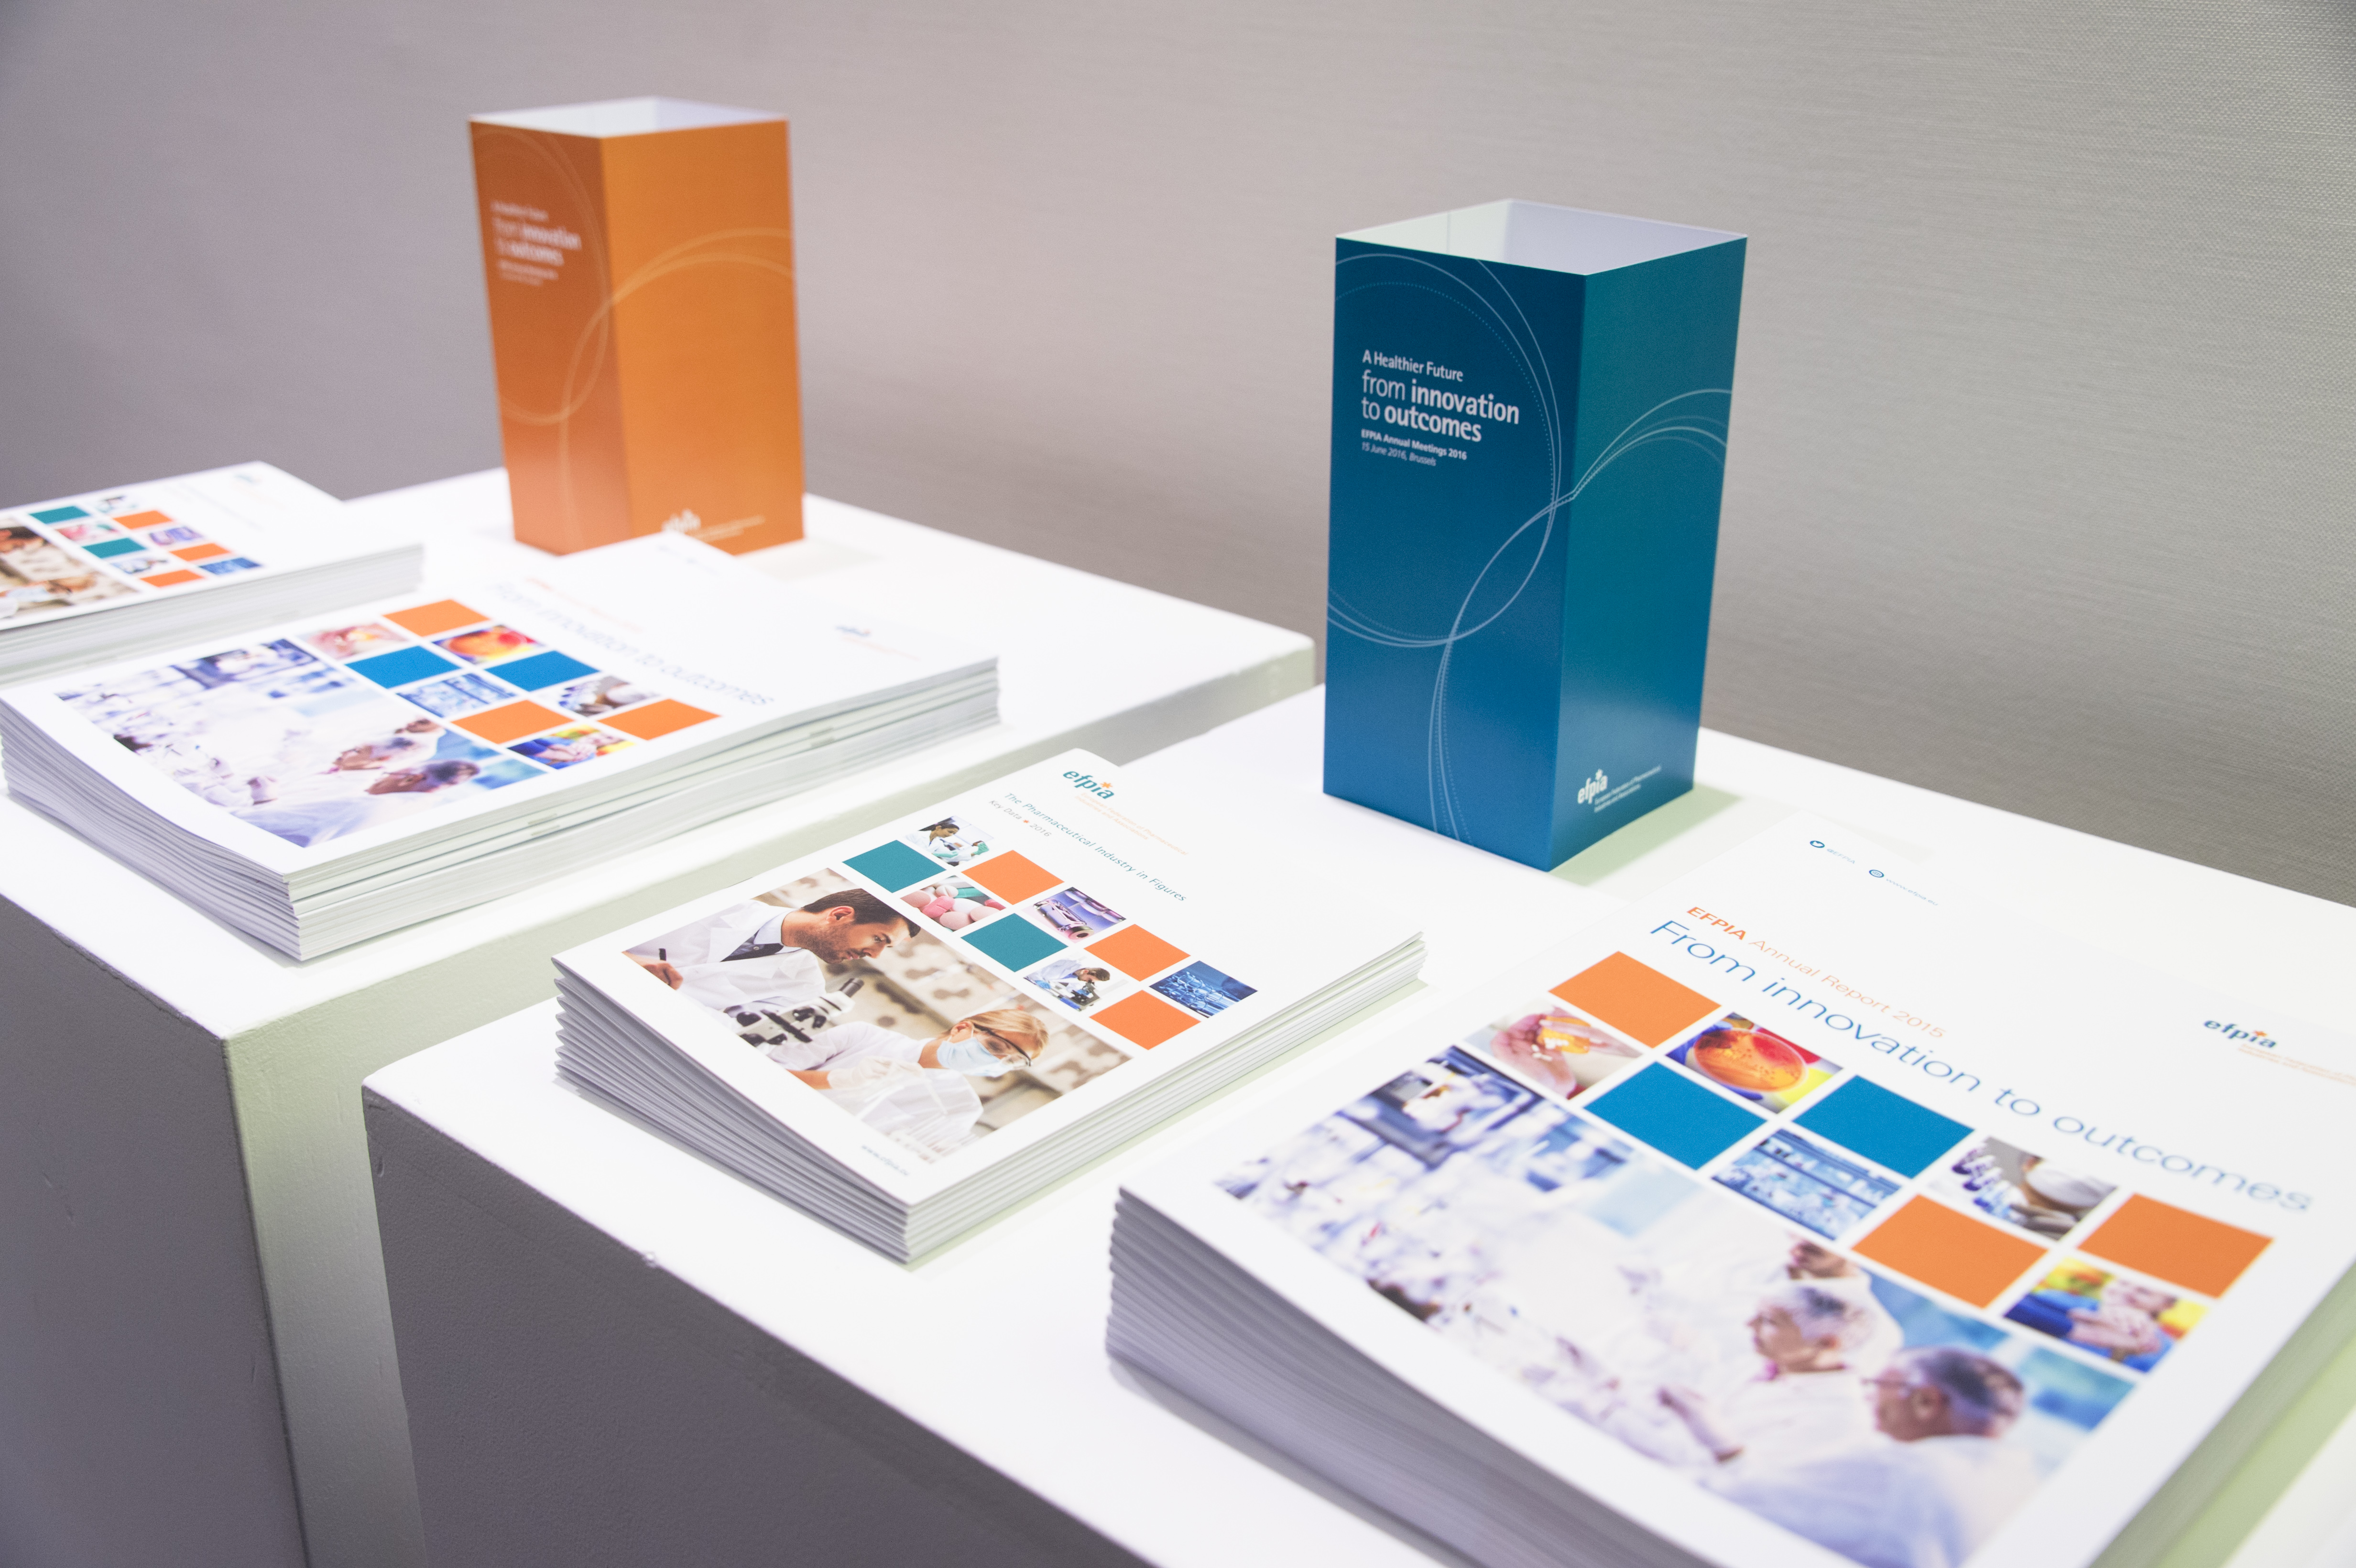 EFPIA Annual Meeting 2016 - Leaflets on a table